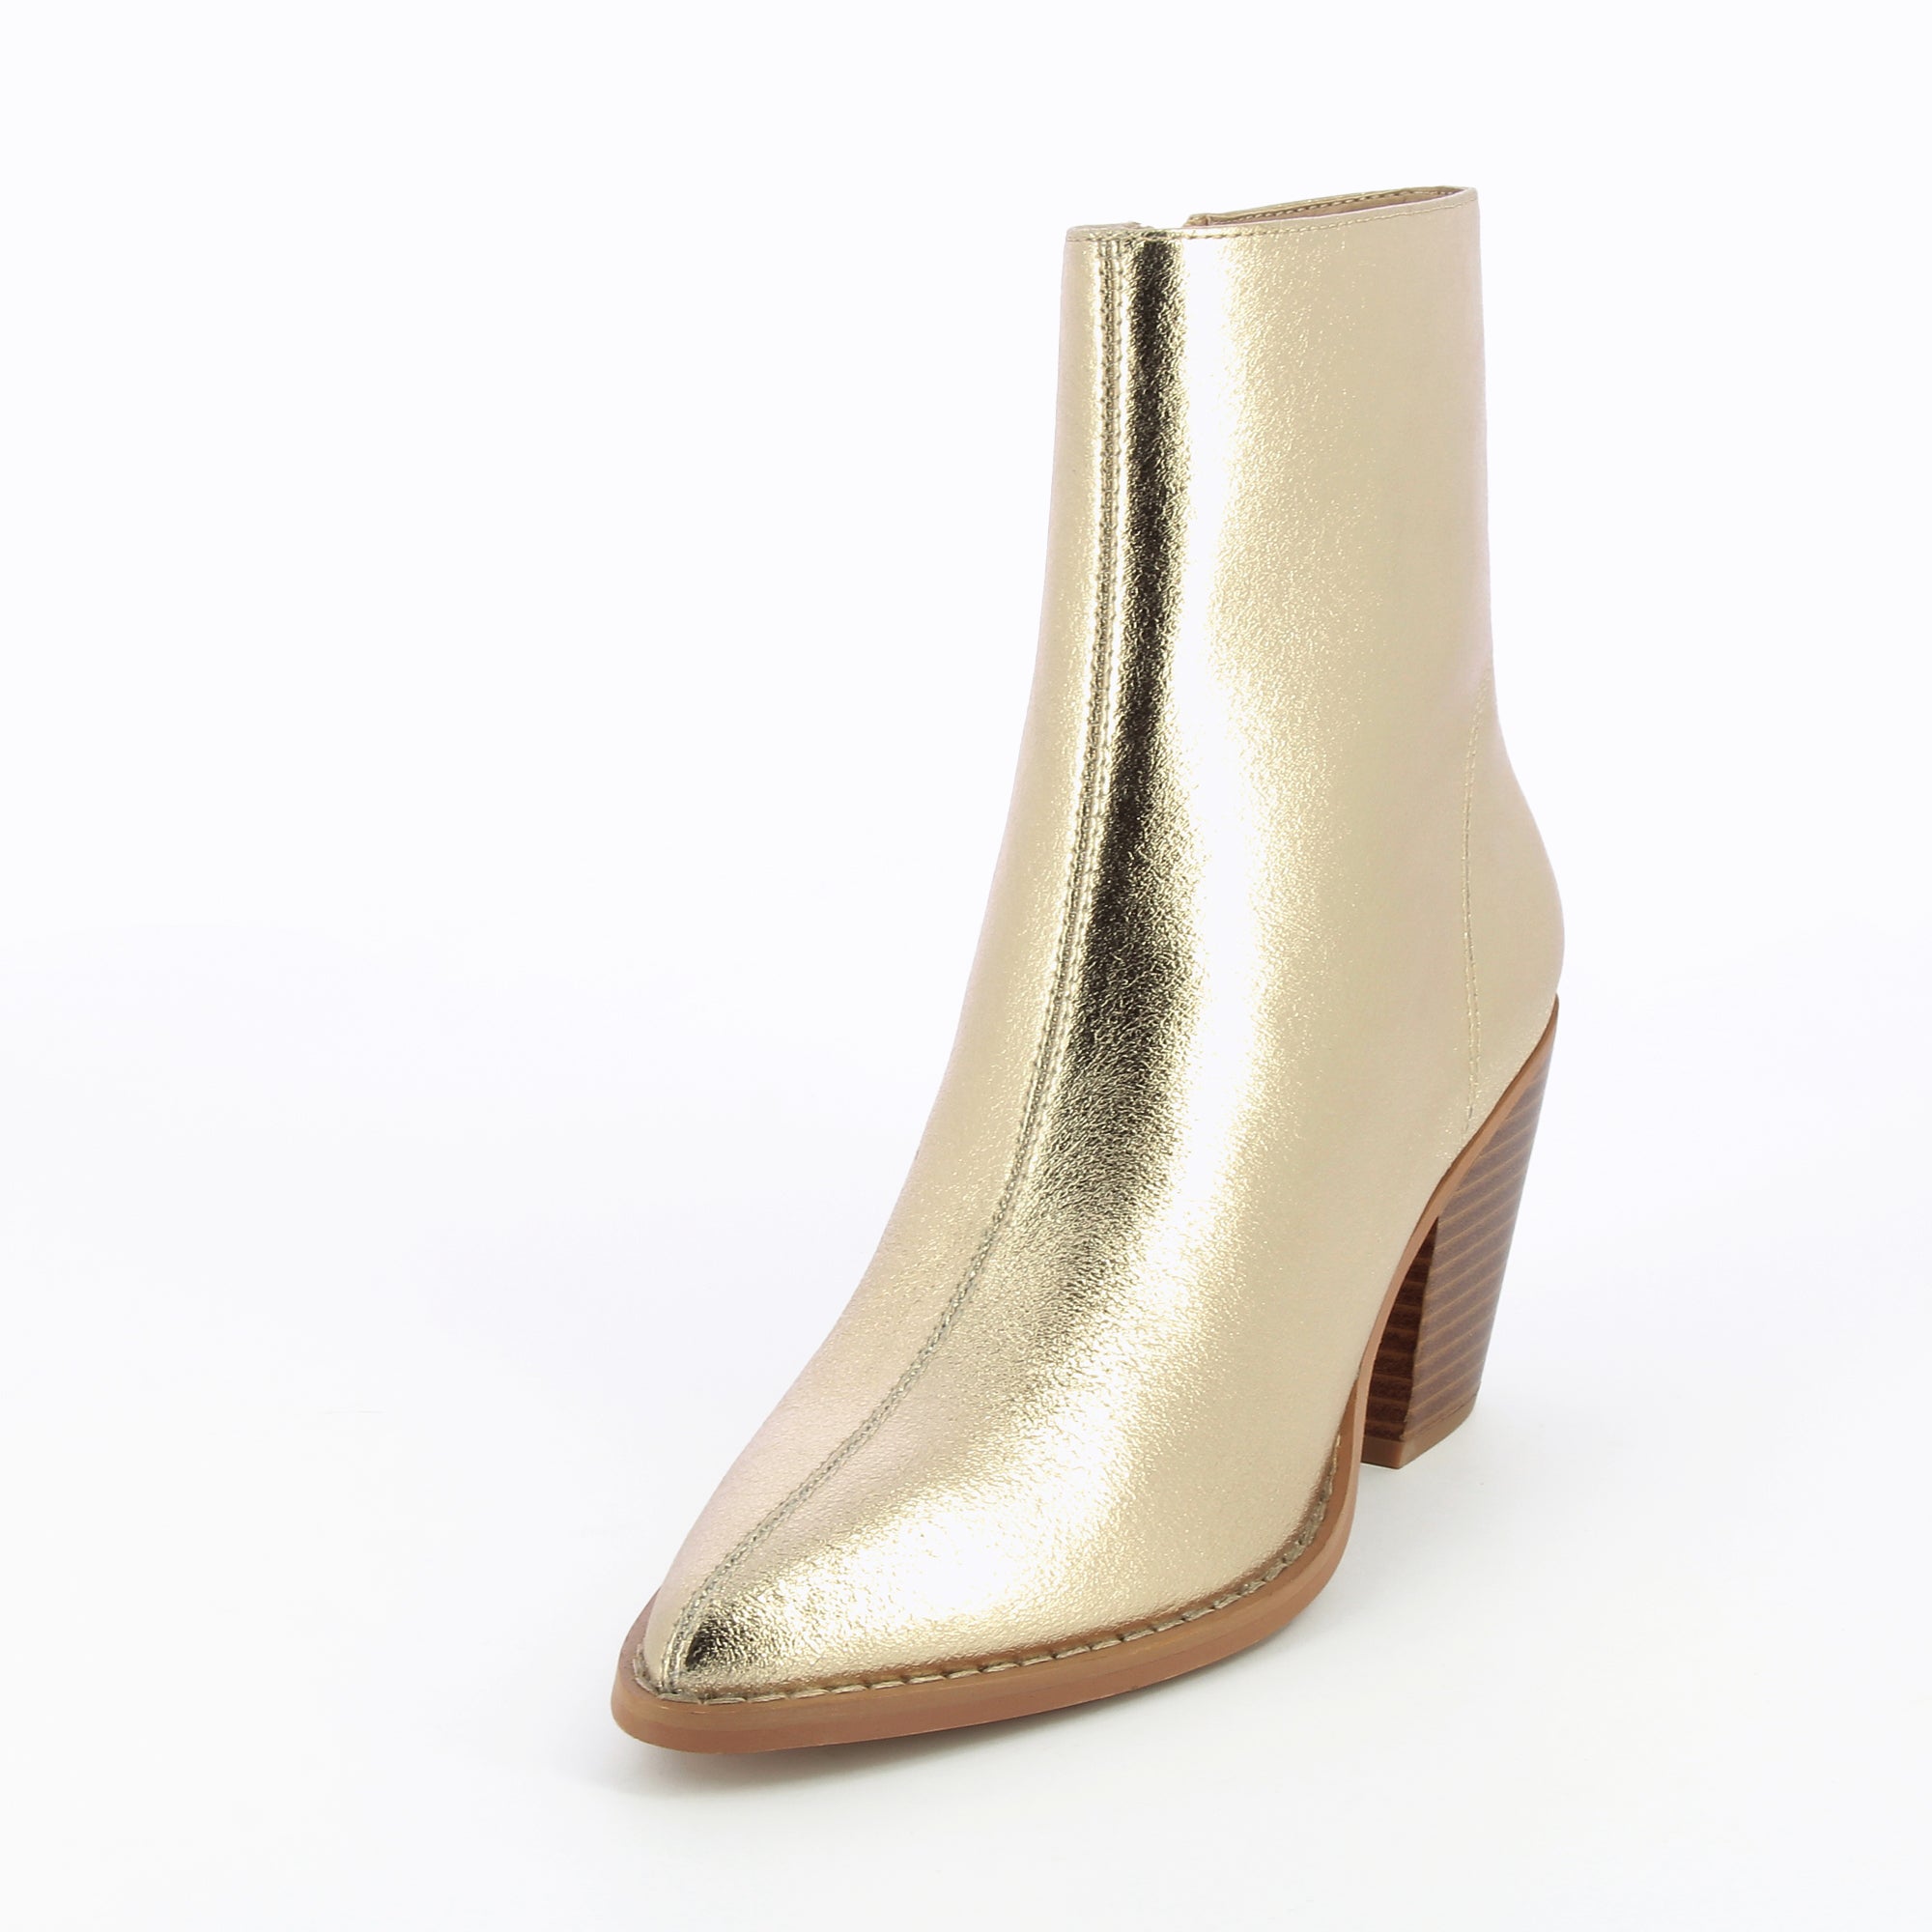 Textured gold Julia ankle boots with heel • Vanessa Wu